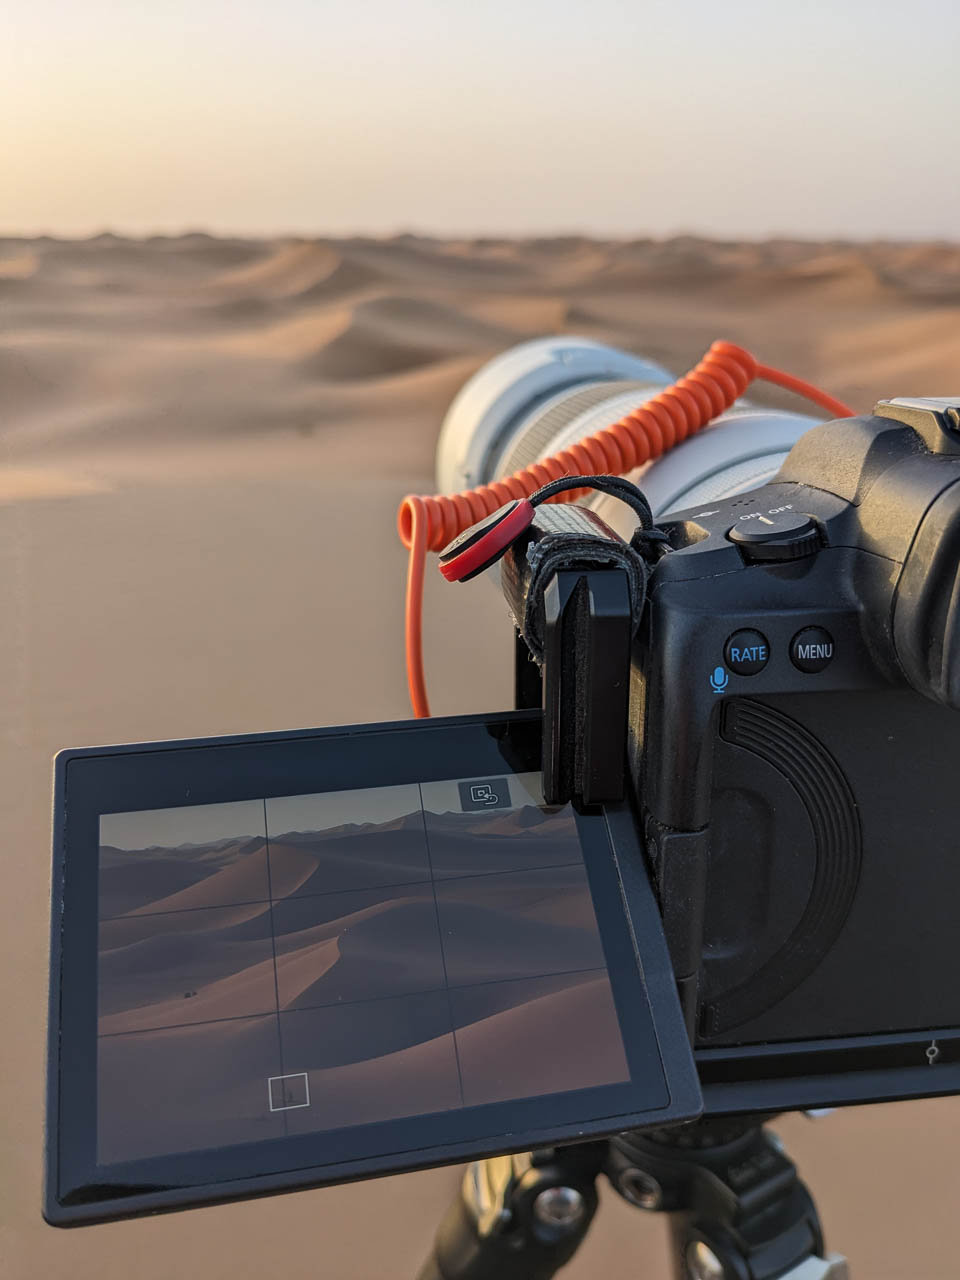 Close-up of camera display of one of participants during sunrise shoot in Desert.